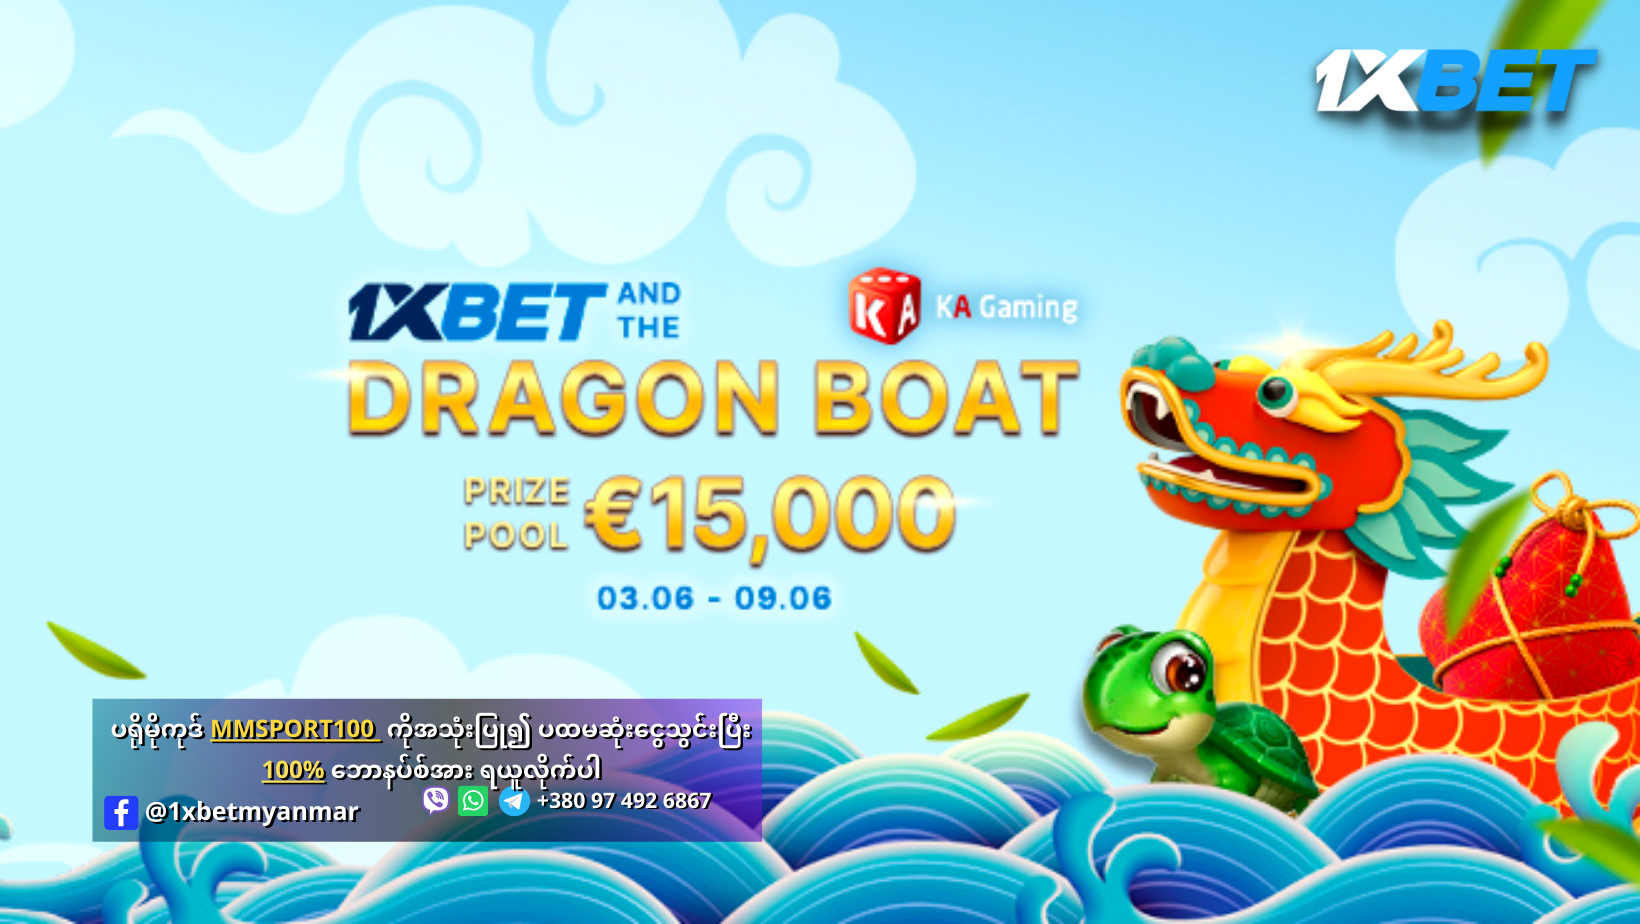 1xBet and the Dragon Boat Promotion